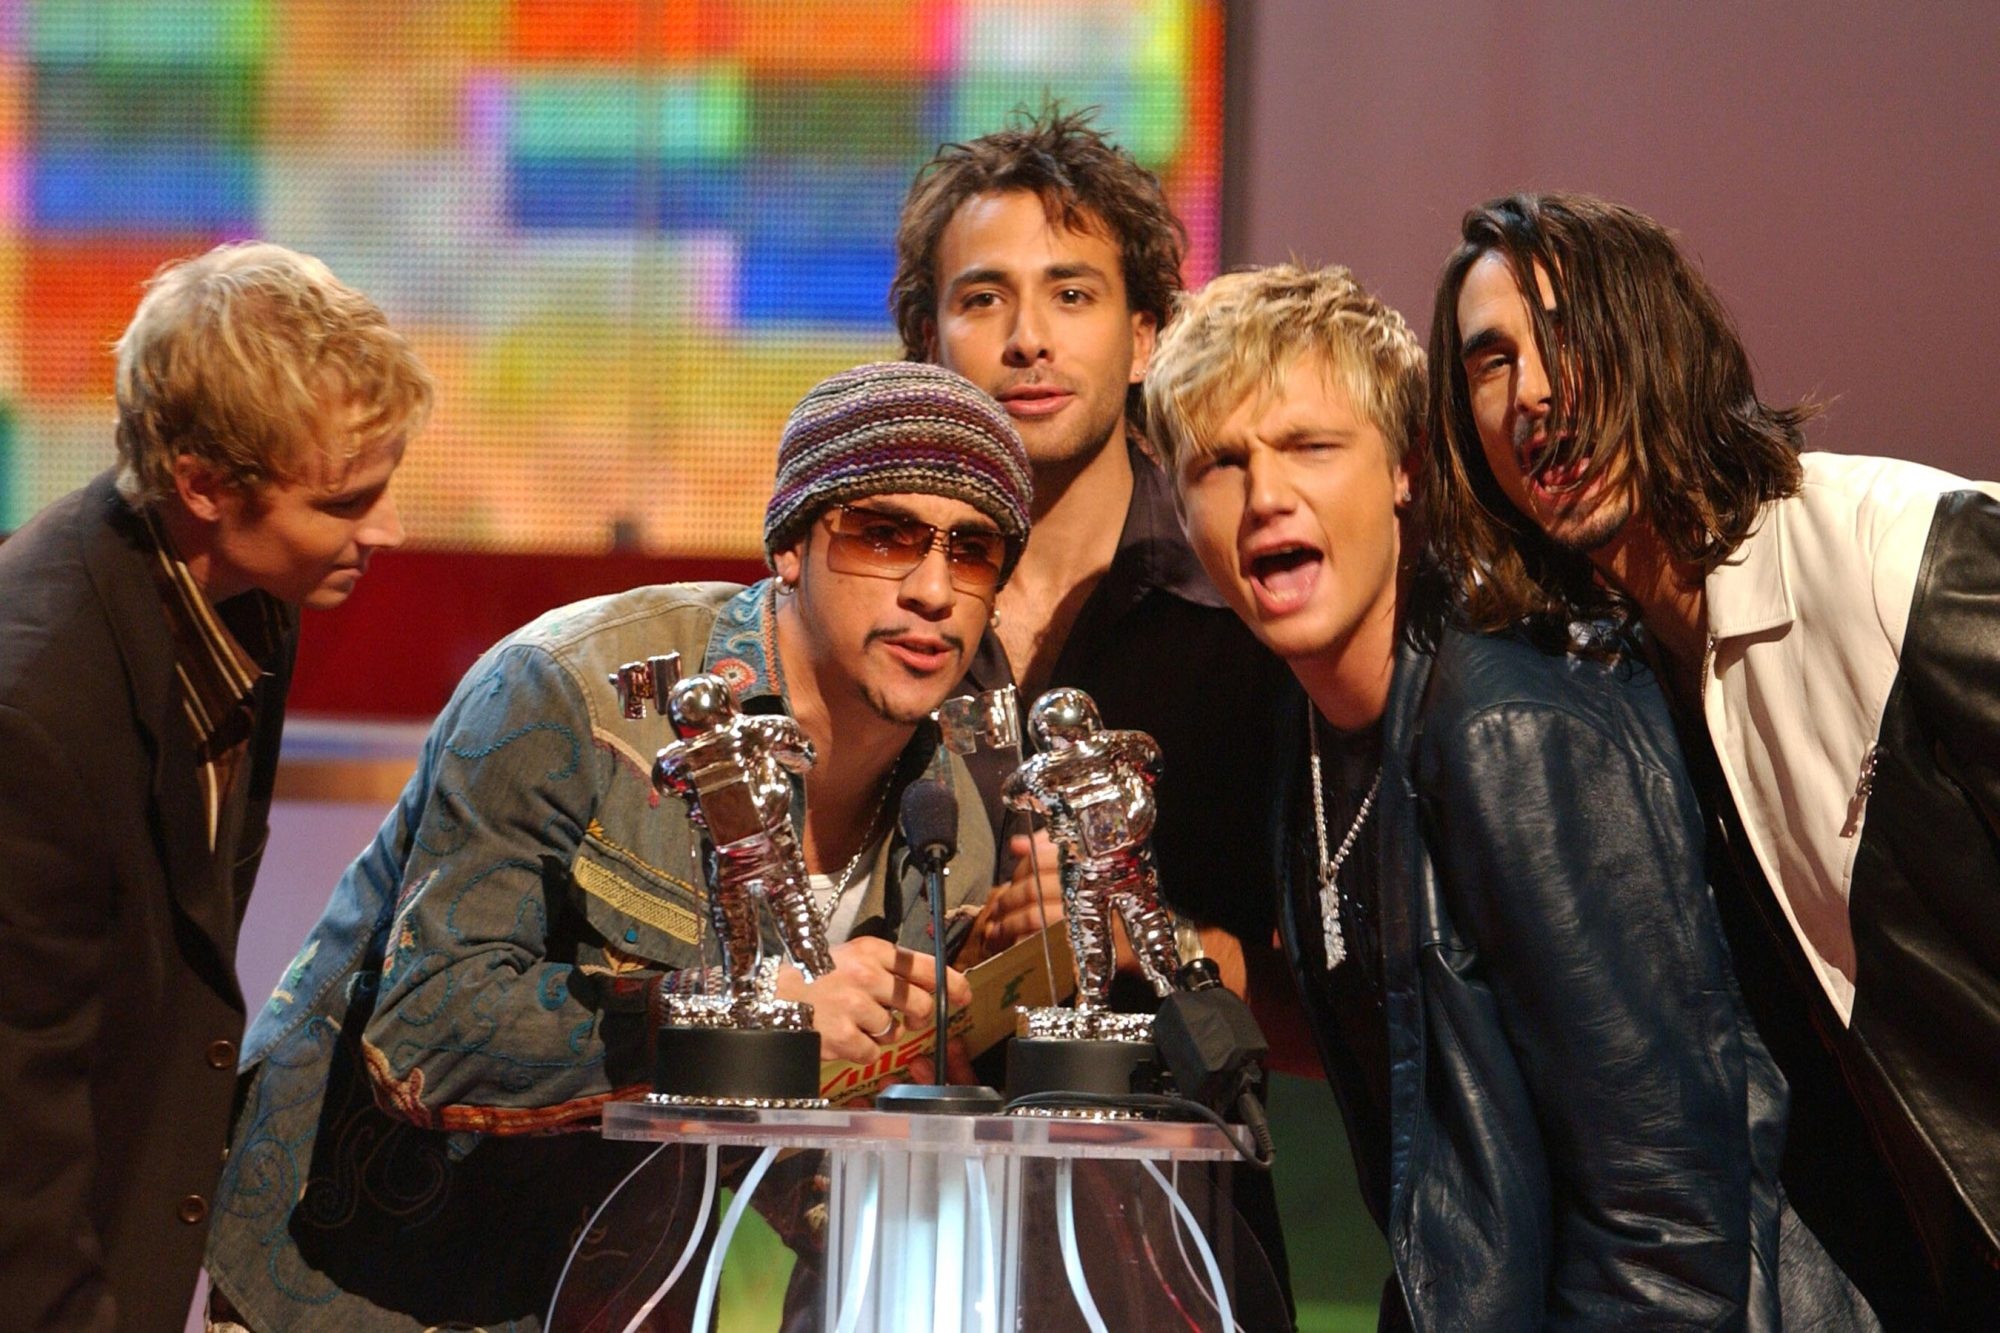 MTV Video Music Awards, Video of the Year winner, Ultimate music quiz, Exciting award show, 2000x1340 HD Desktop